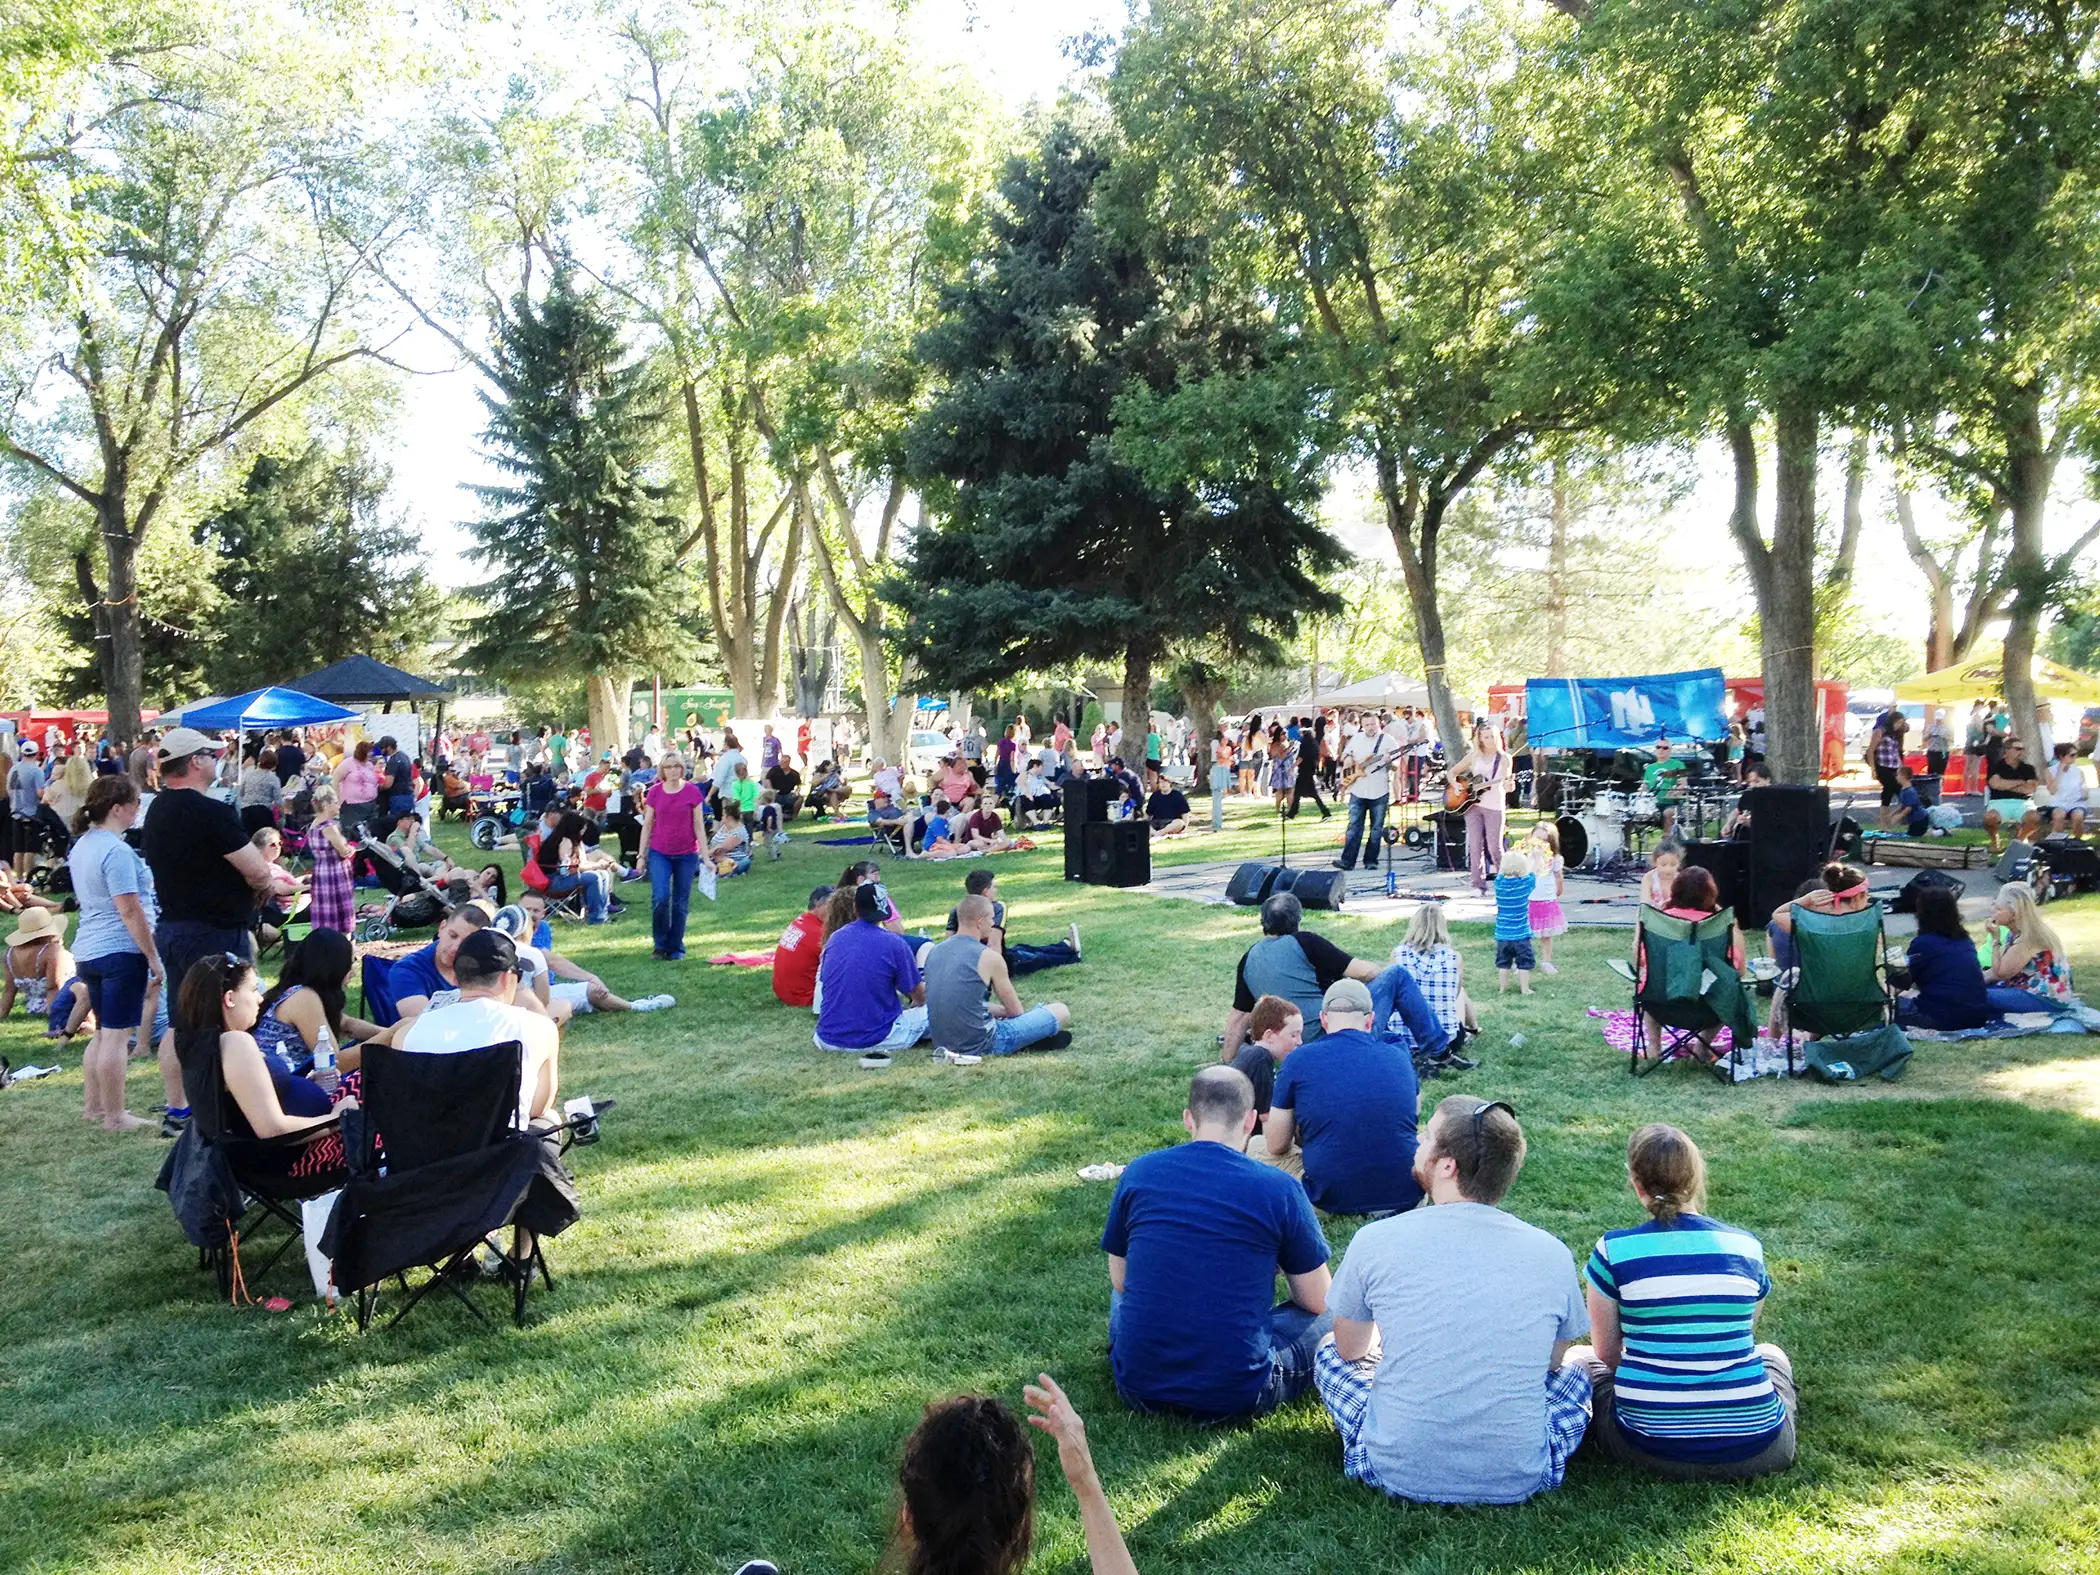 Layton, Utah. Among the most popular events in family-friendly Layton is the annual Taste of the Town festival in the Layton Commons Park.